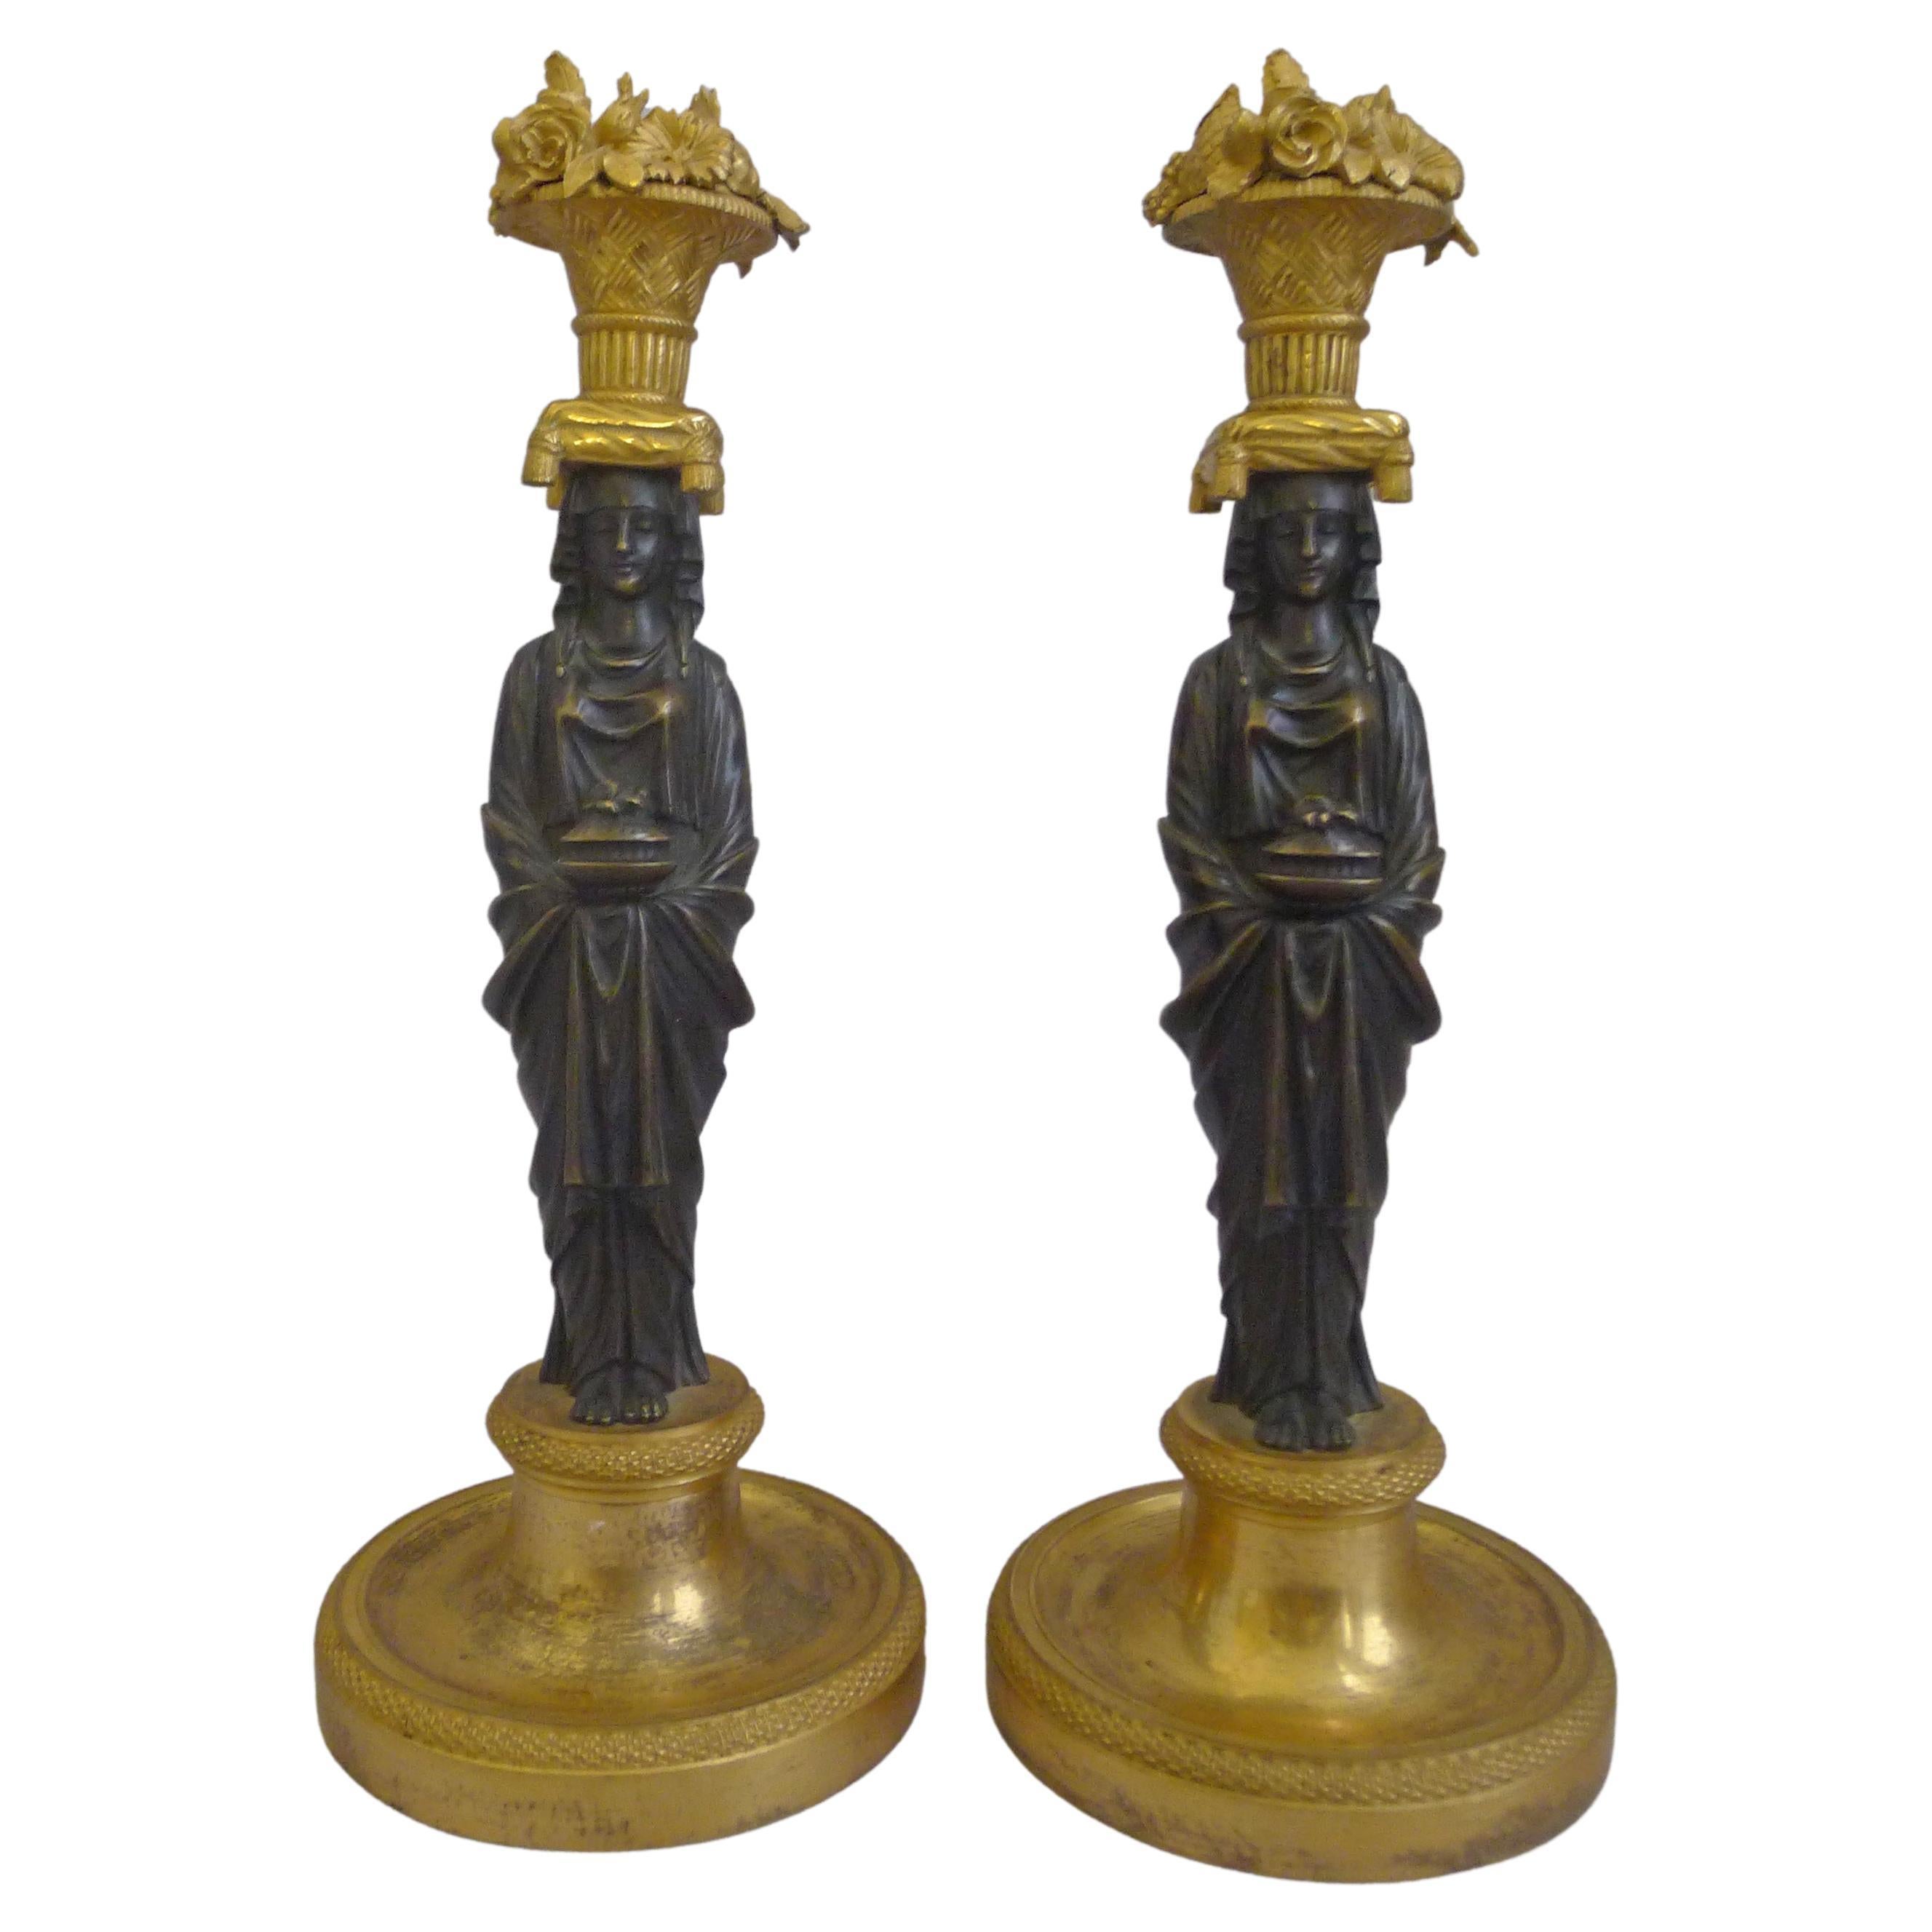 Magnificent Pair of English Regency Figural Candlesticks in the Manner of Hope